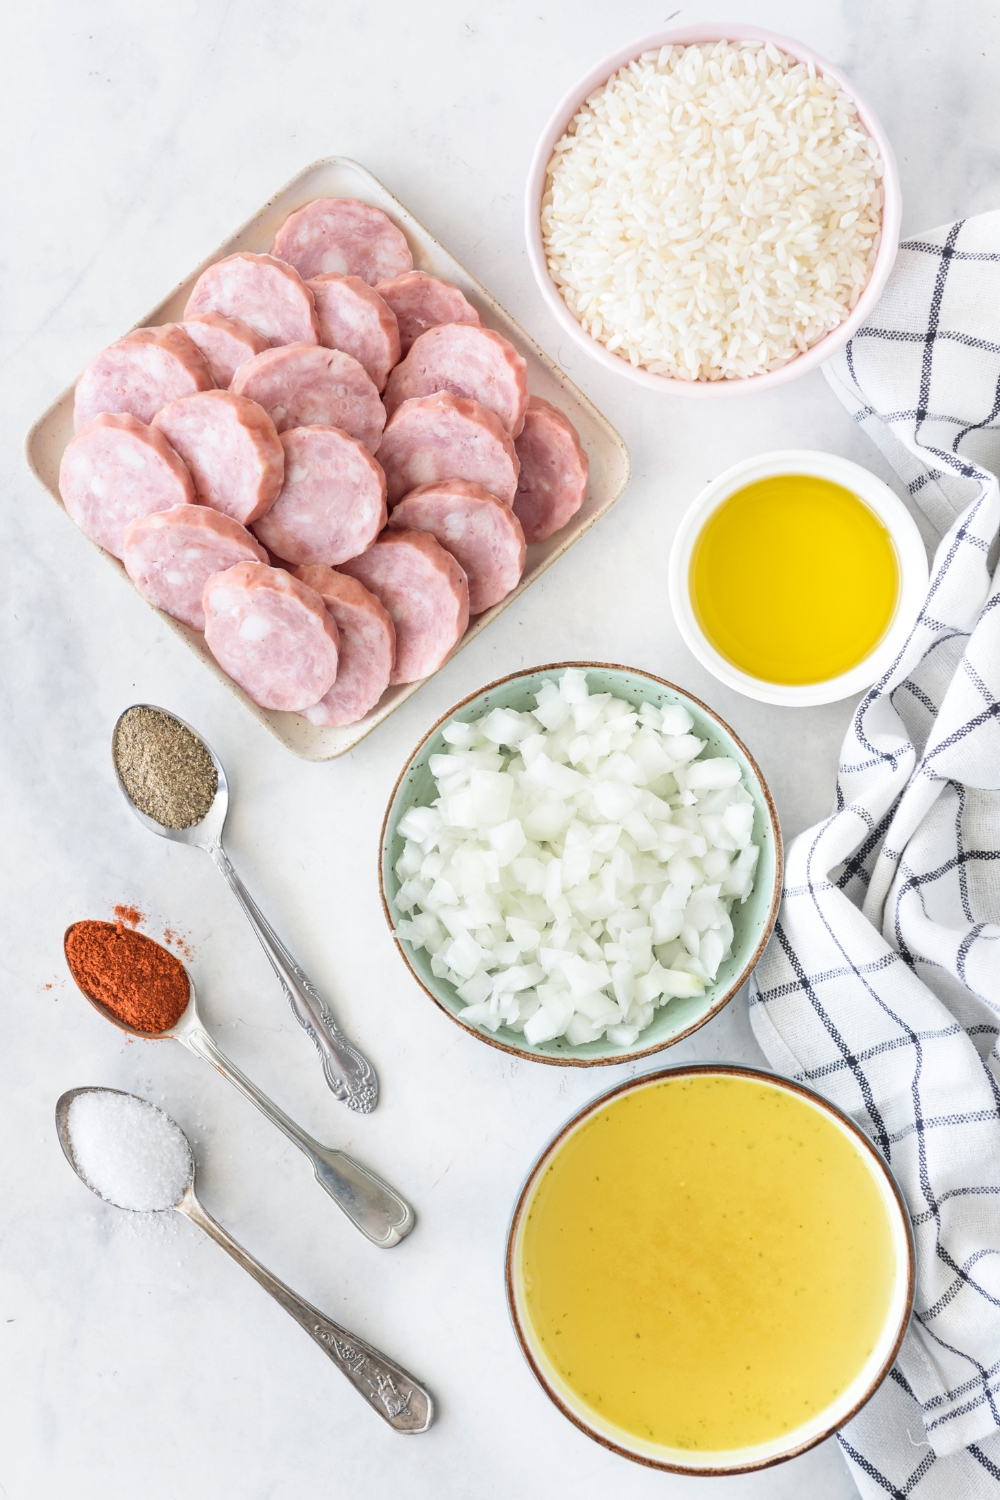 An assortment of ingredients including a plate of sliced sausages and bowls of rice, broth, diced onion, oil, and three spoons holding spices.